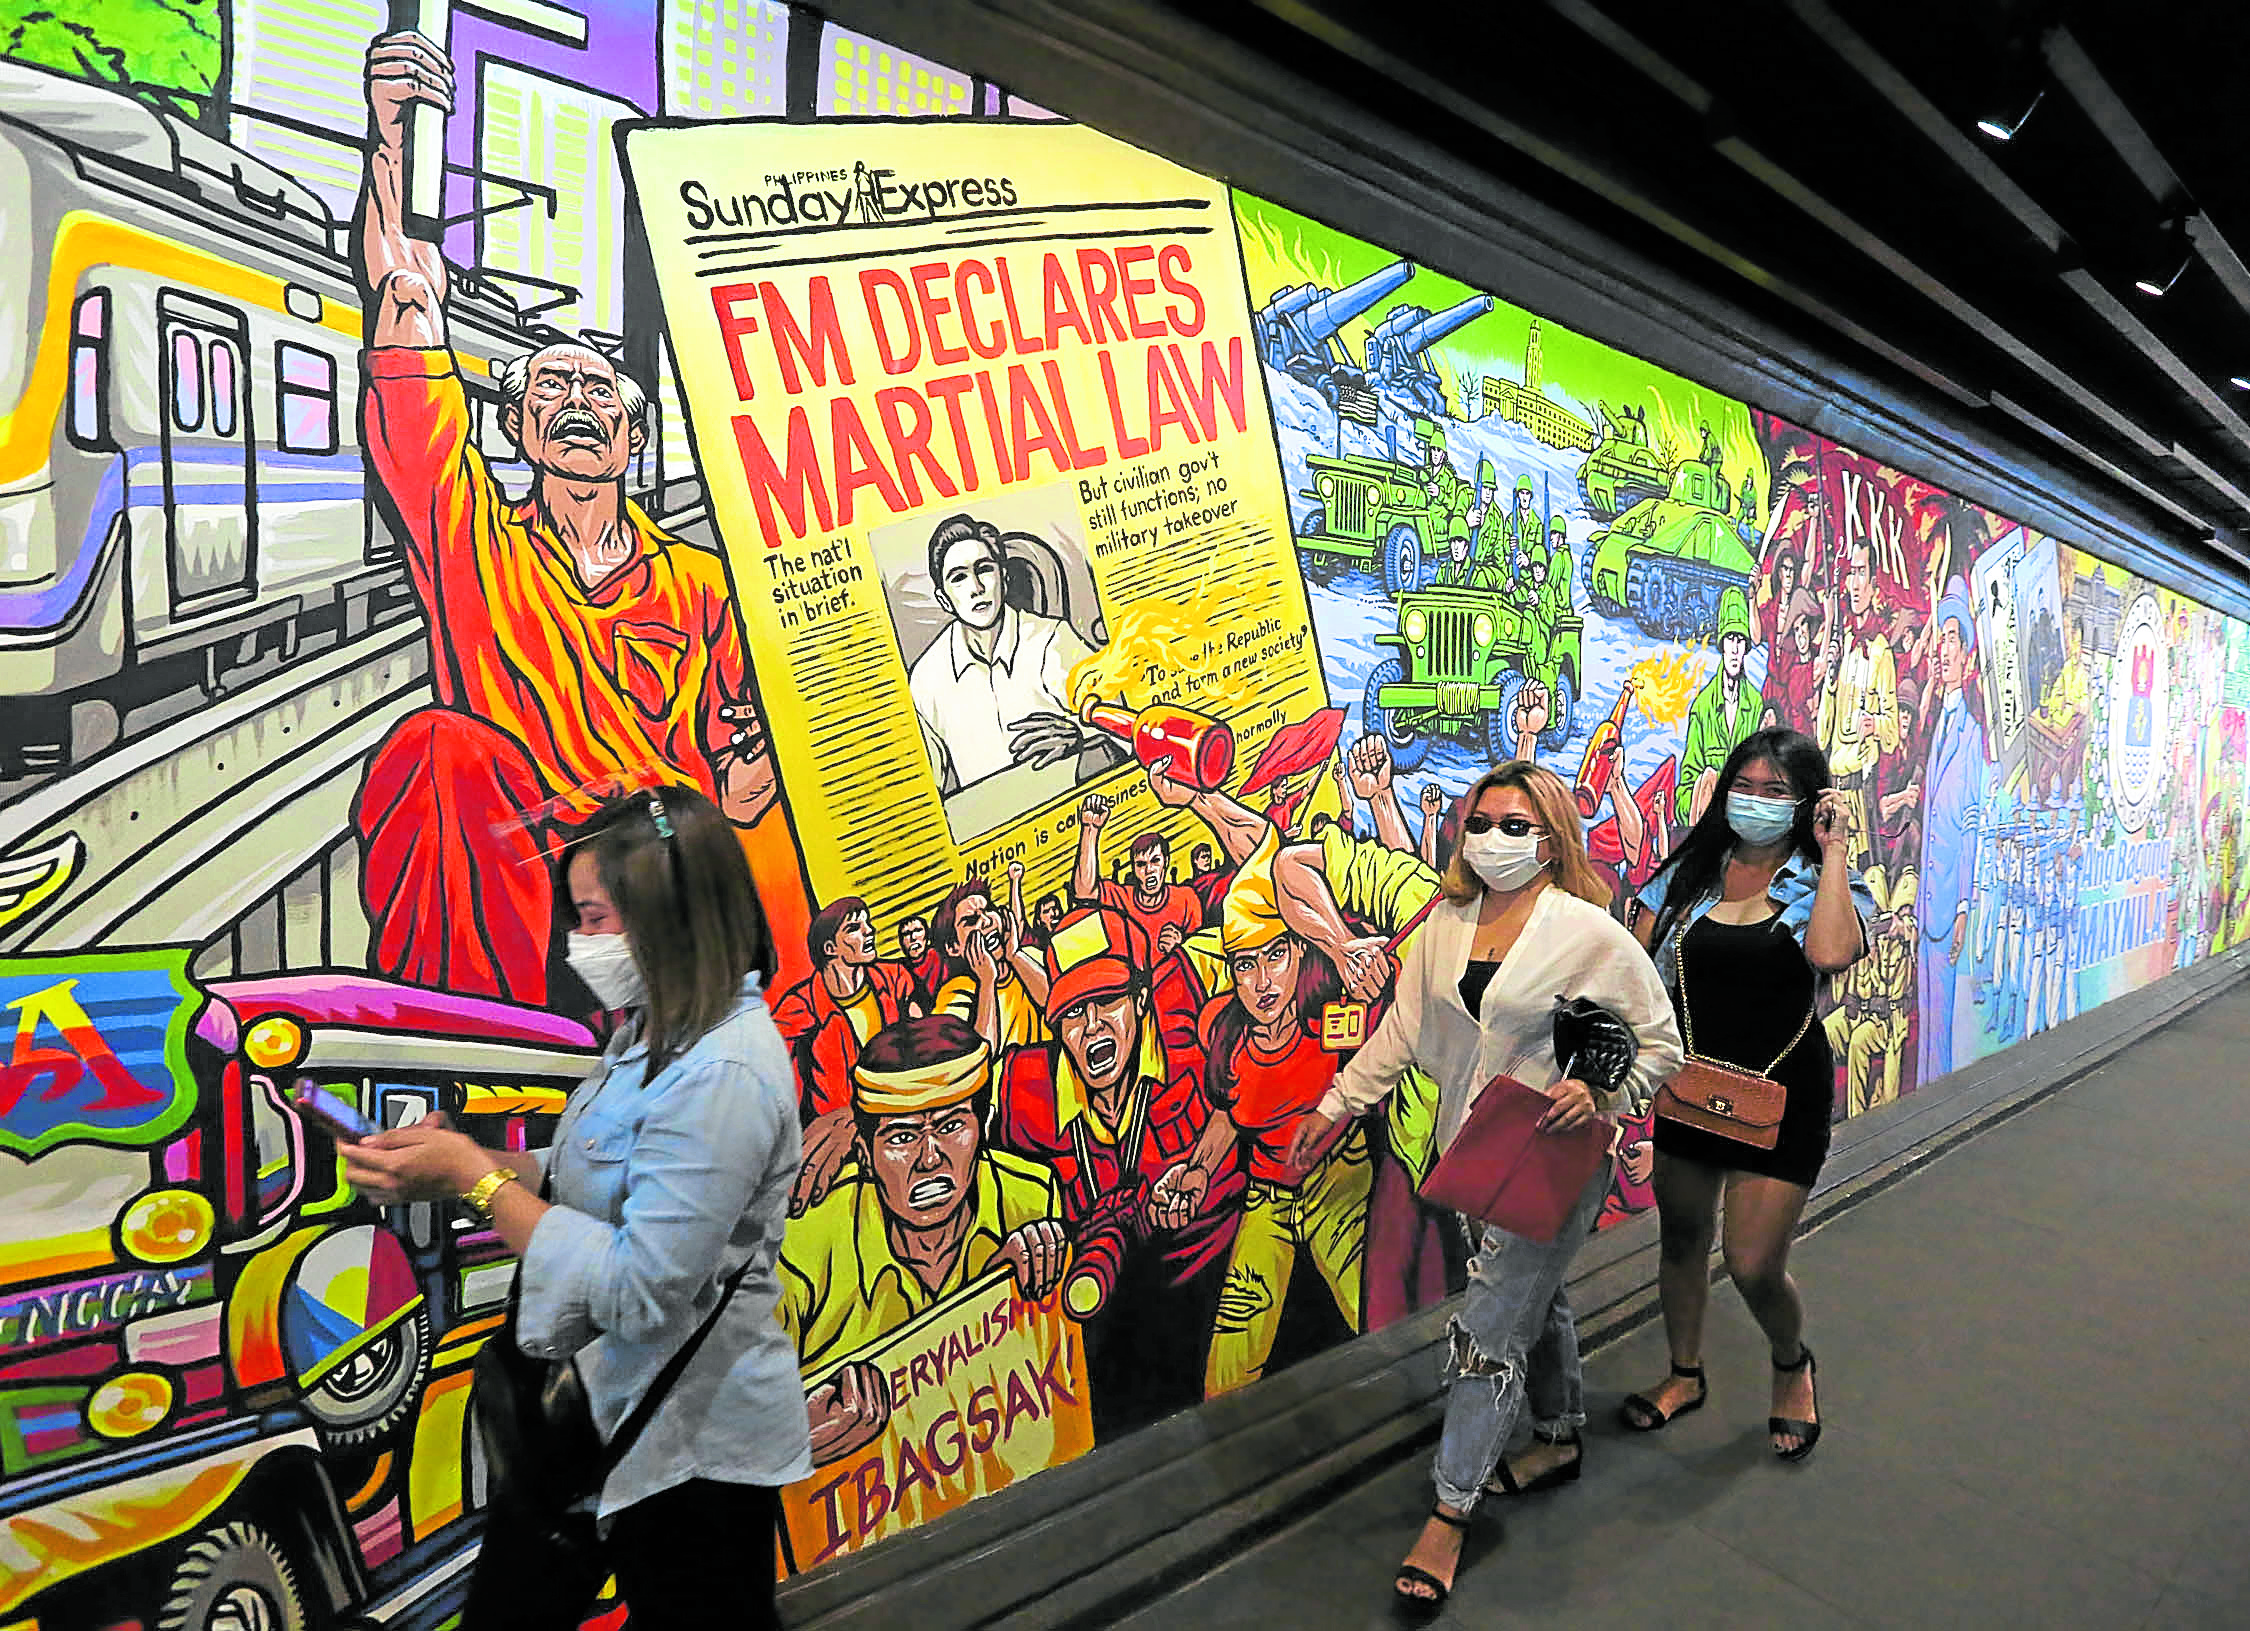 HISTORY WALK-THROUGH A mural depicting the Sept. 23, 1972, declaration of martial law and other historic events greets pedestrians at the newly spruced up Lagusnilad underpass in Manila. This week the country marks the 48th anniversary of the proclamation of military rule that enabled President Ferdinand Marcos to stay in power as dictator. —MARIANNE BERMUDEZ